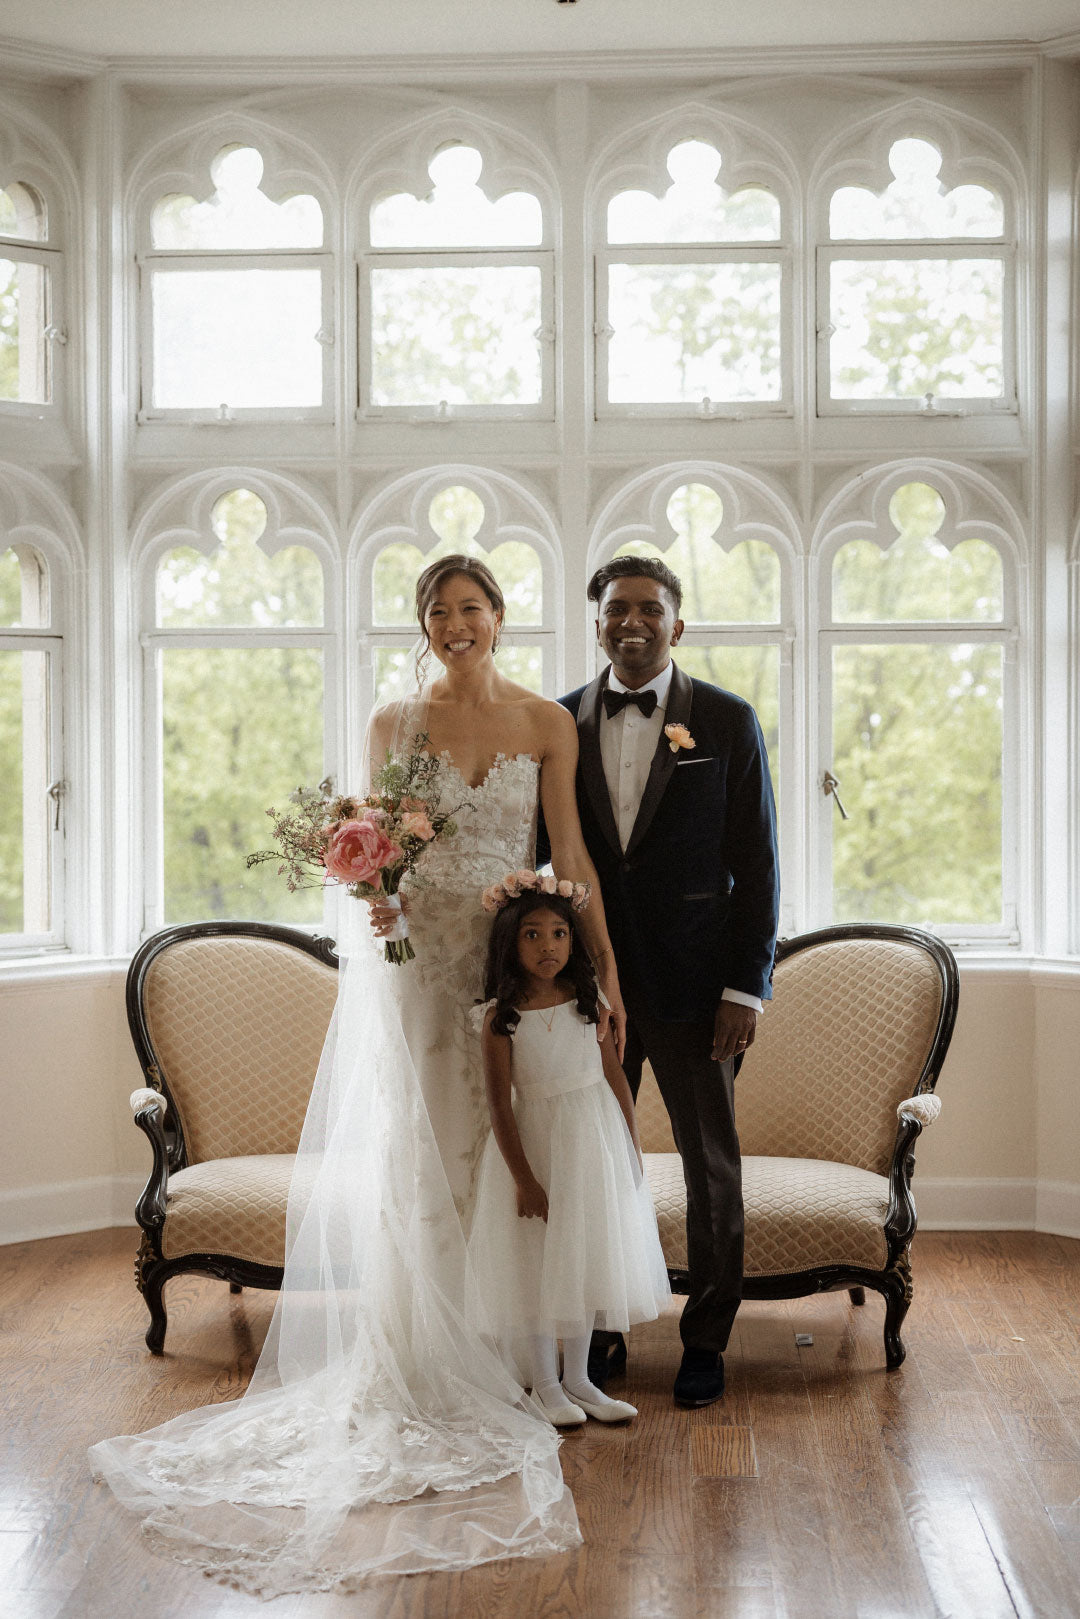 Bride and groom with flower girl